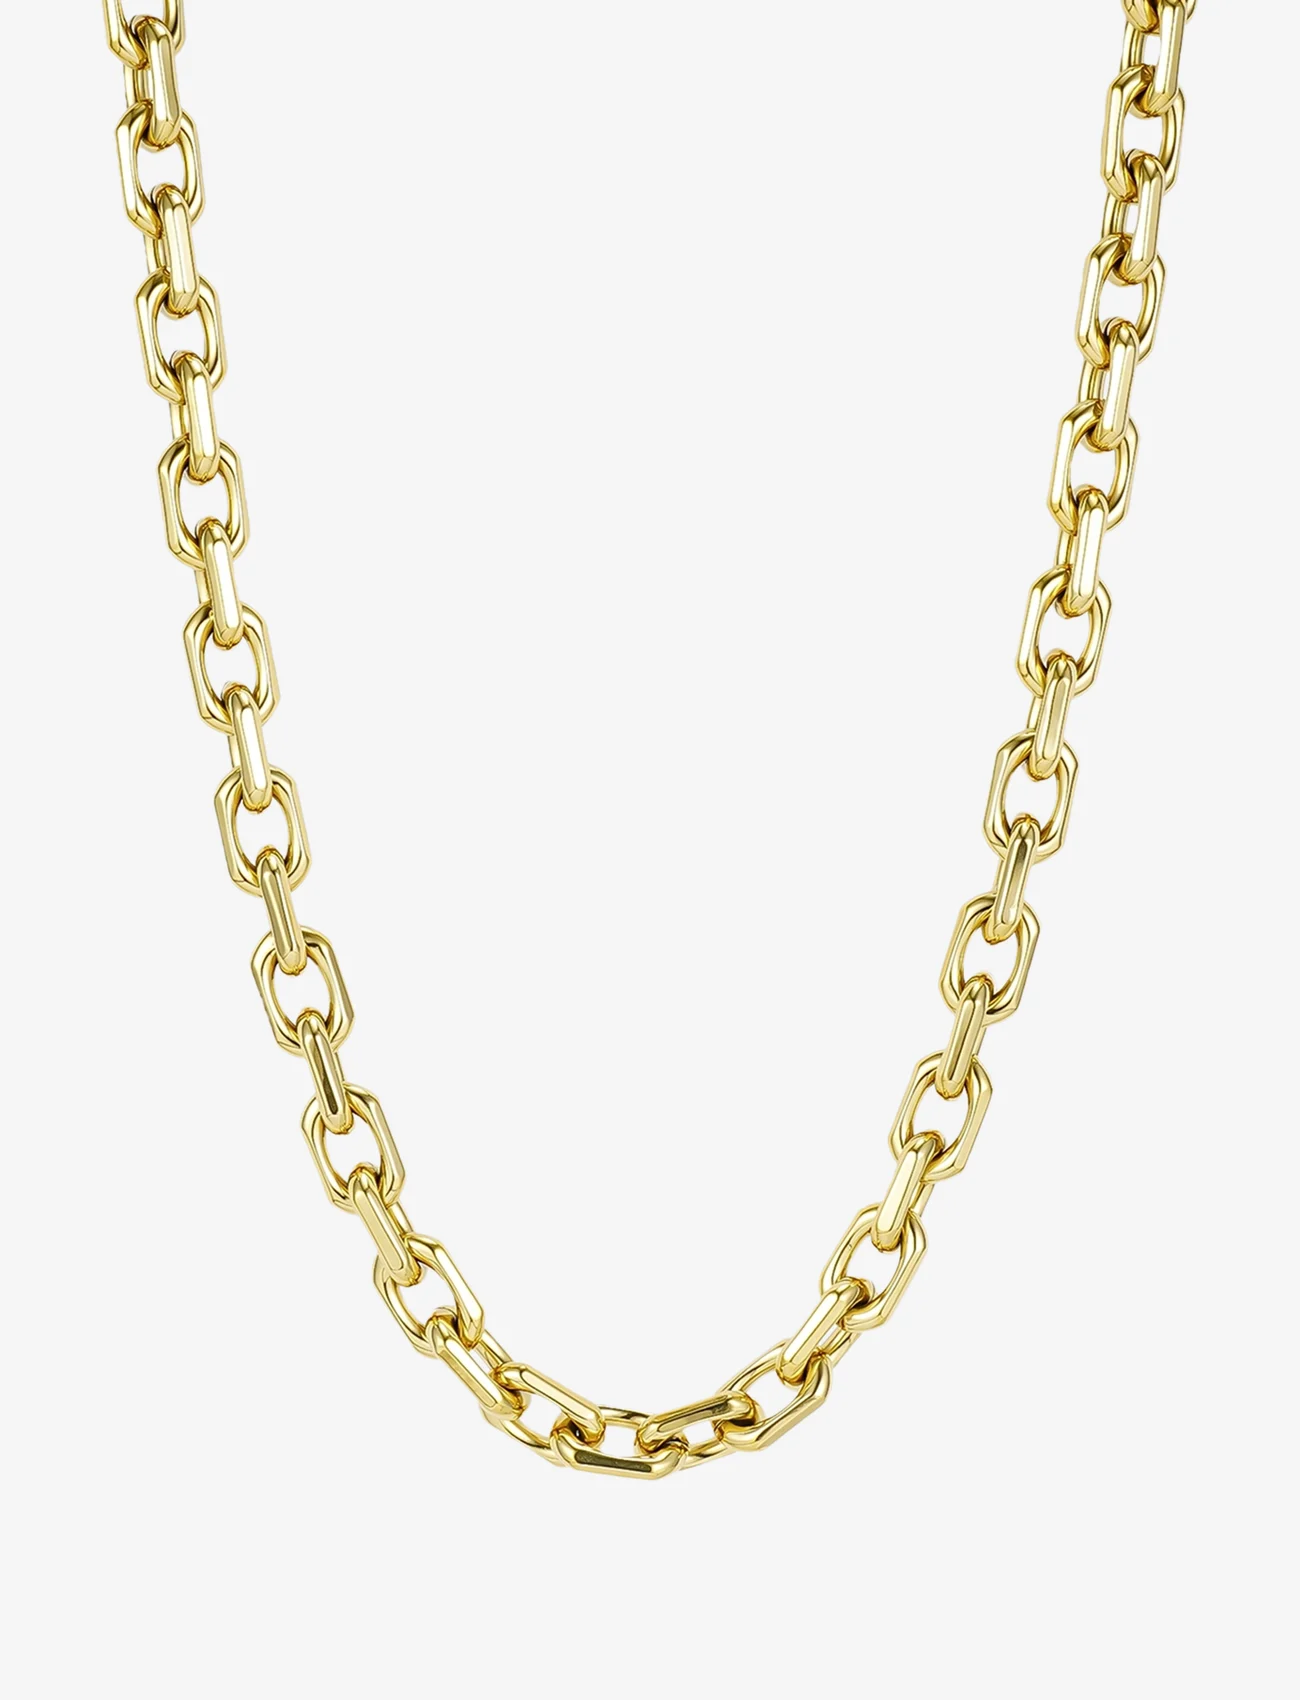 Bud to rose - Edge Necklace - festmode zu outlet-preisen - gold - 0